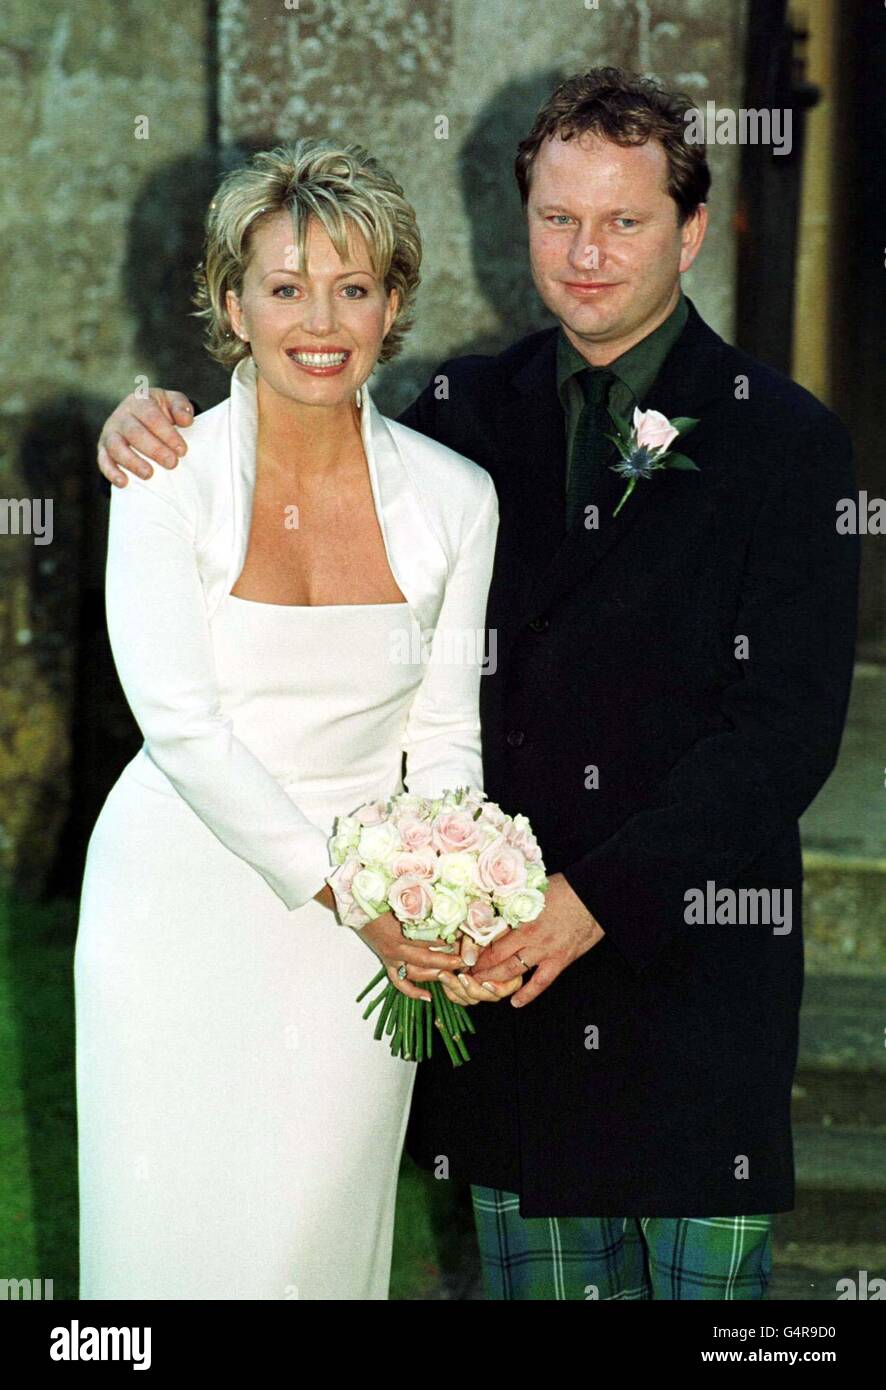 Channel 5 newsreader Kirsty Young with owner of Soho House Nick Jones after their wedding at Babington House, Somerset. * 24/7/2000 ITN lunchtime news presenter Kirsty, who is expecting her first child, said that she and her husband, millionaire hotelier Nick Jones were 'over the moon' about the baby due in early spring 2001. Stock Photo